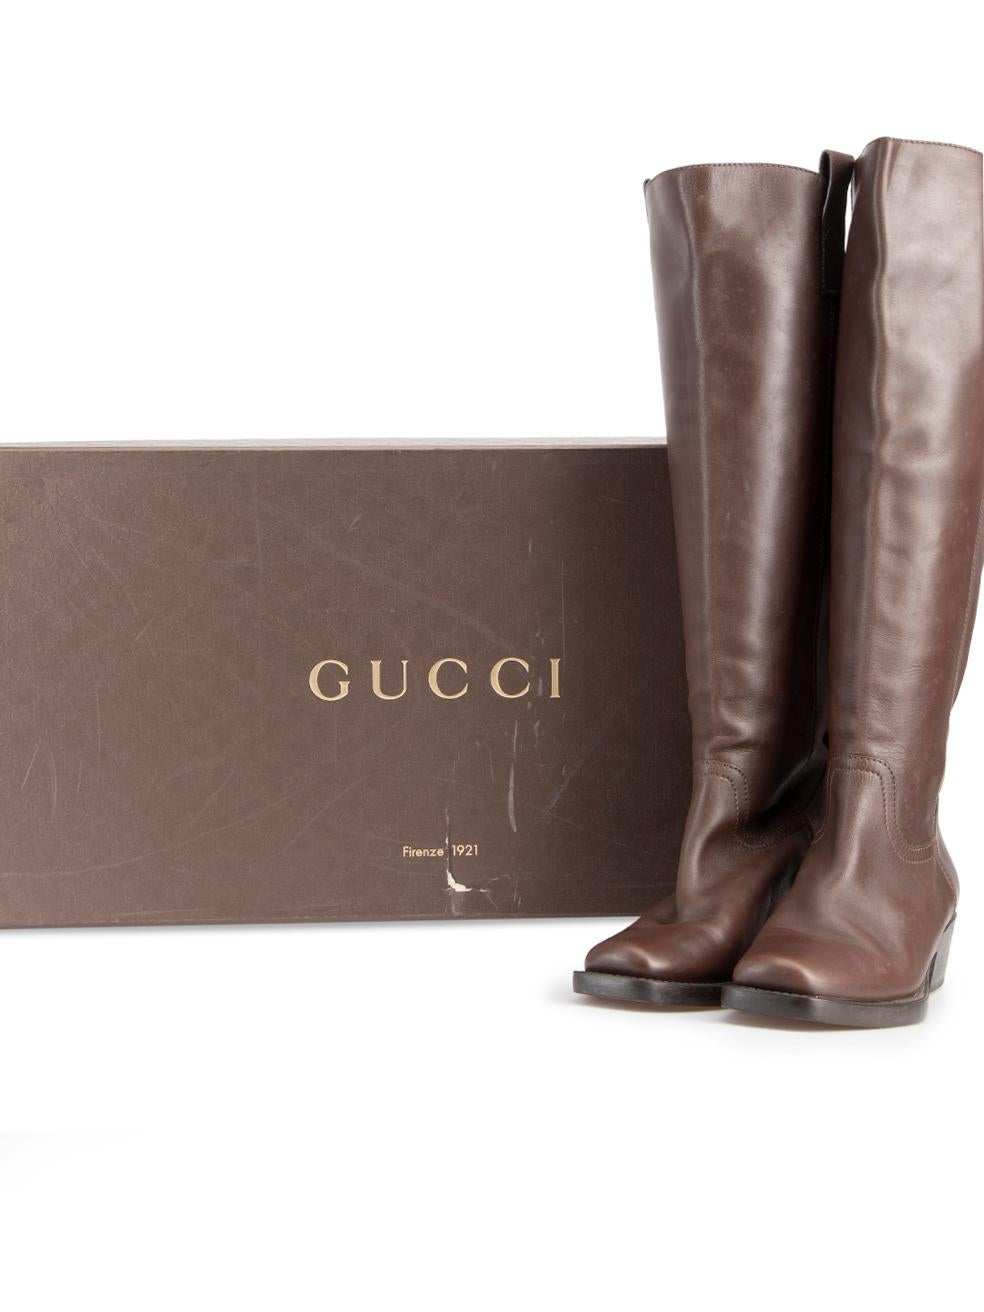 Gucci Women's Brown Square Toe Knee High Boots 2